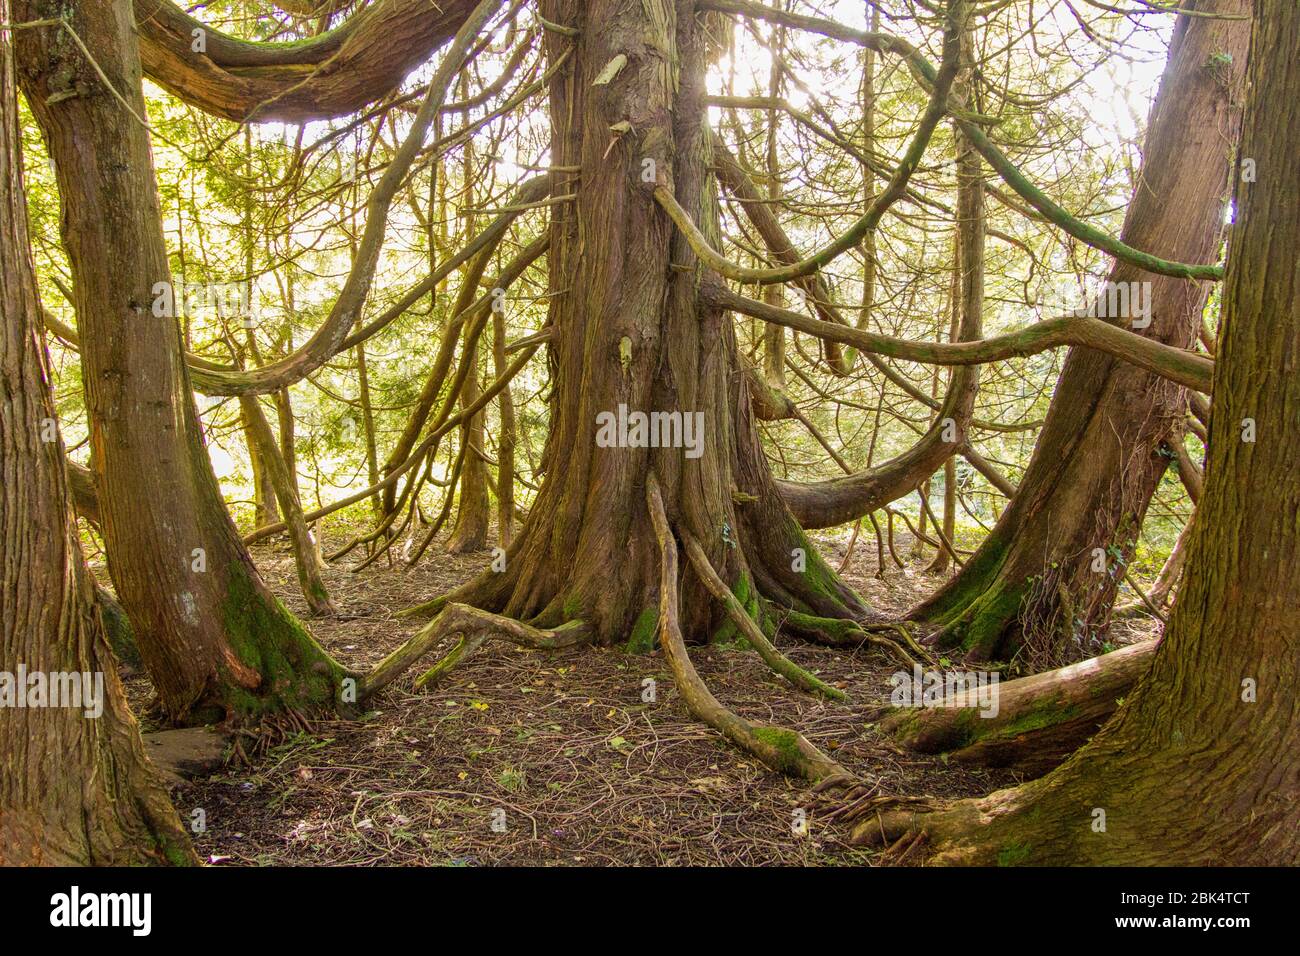 An odd tree spotted in a forest in Ireland Stock Photo